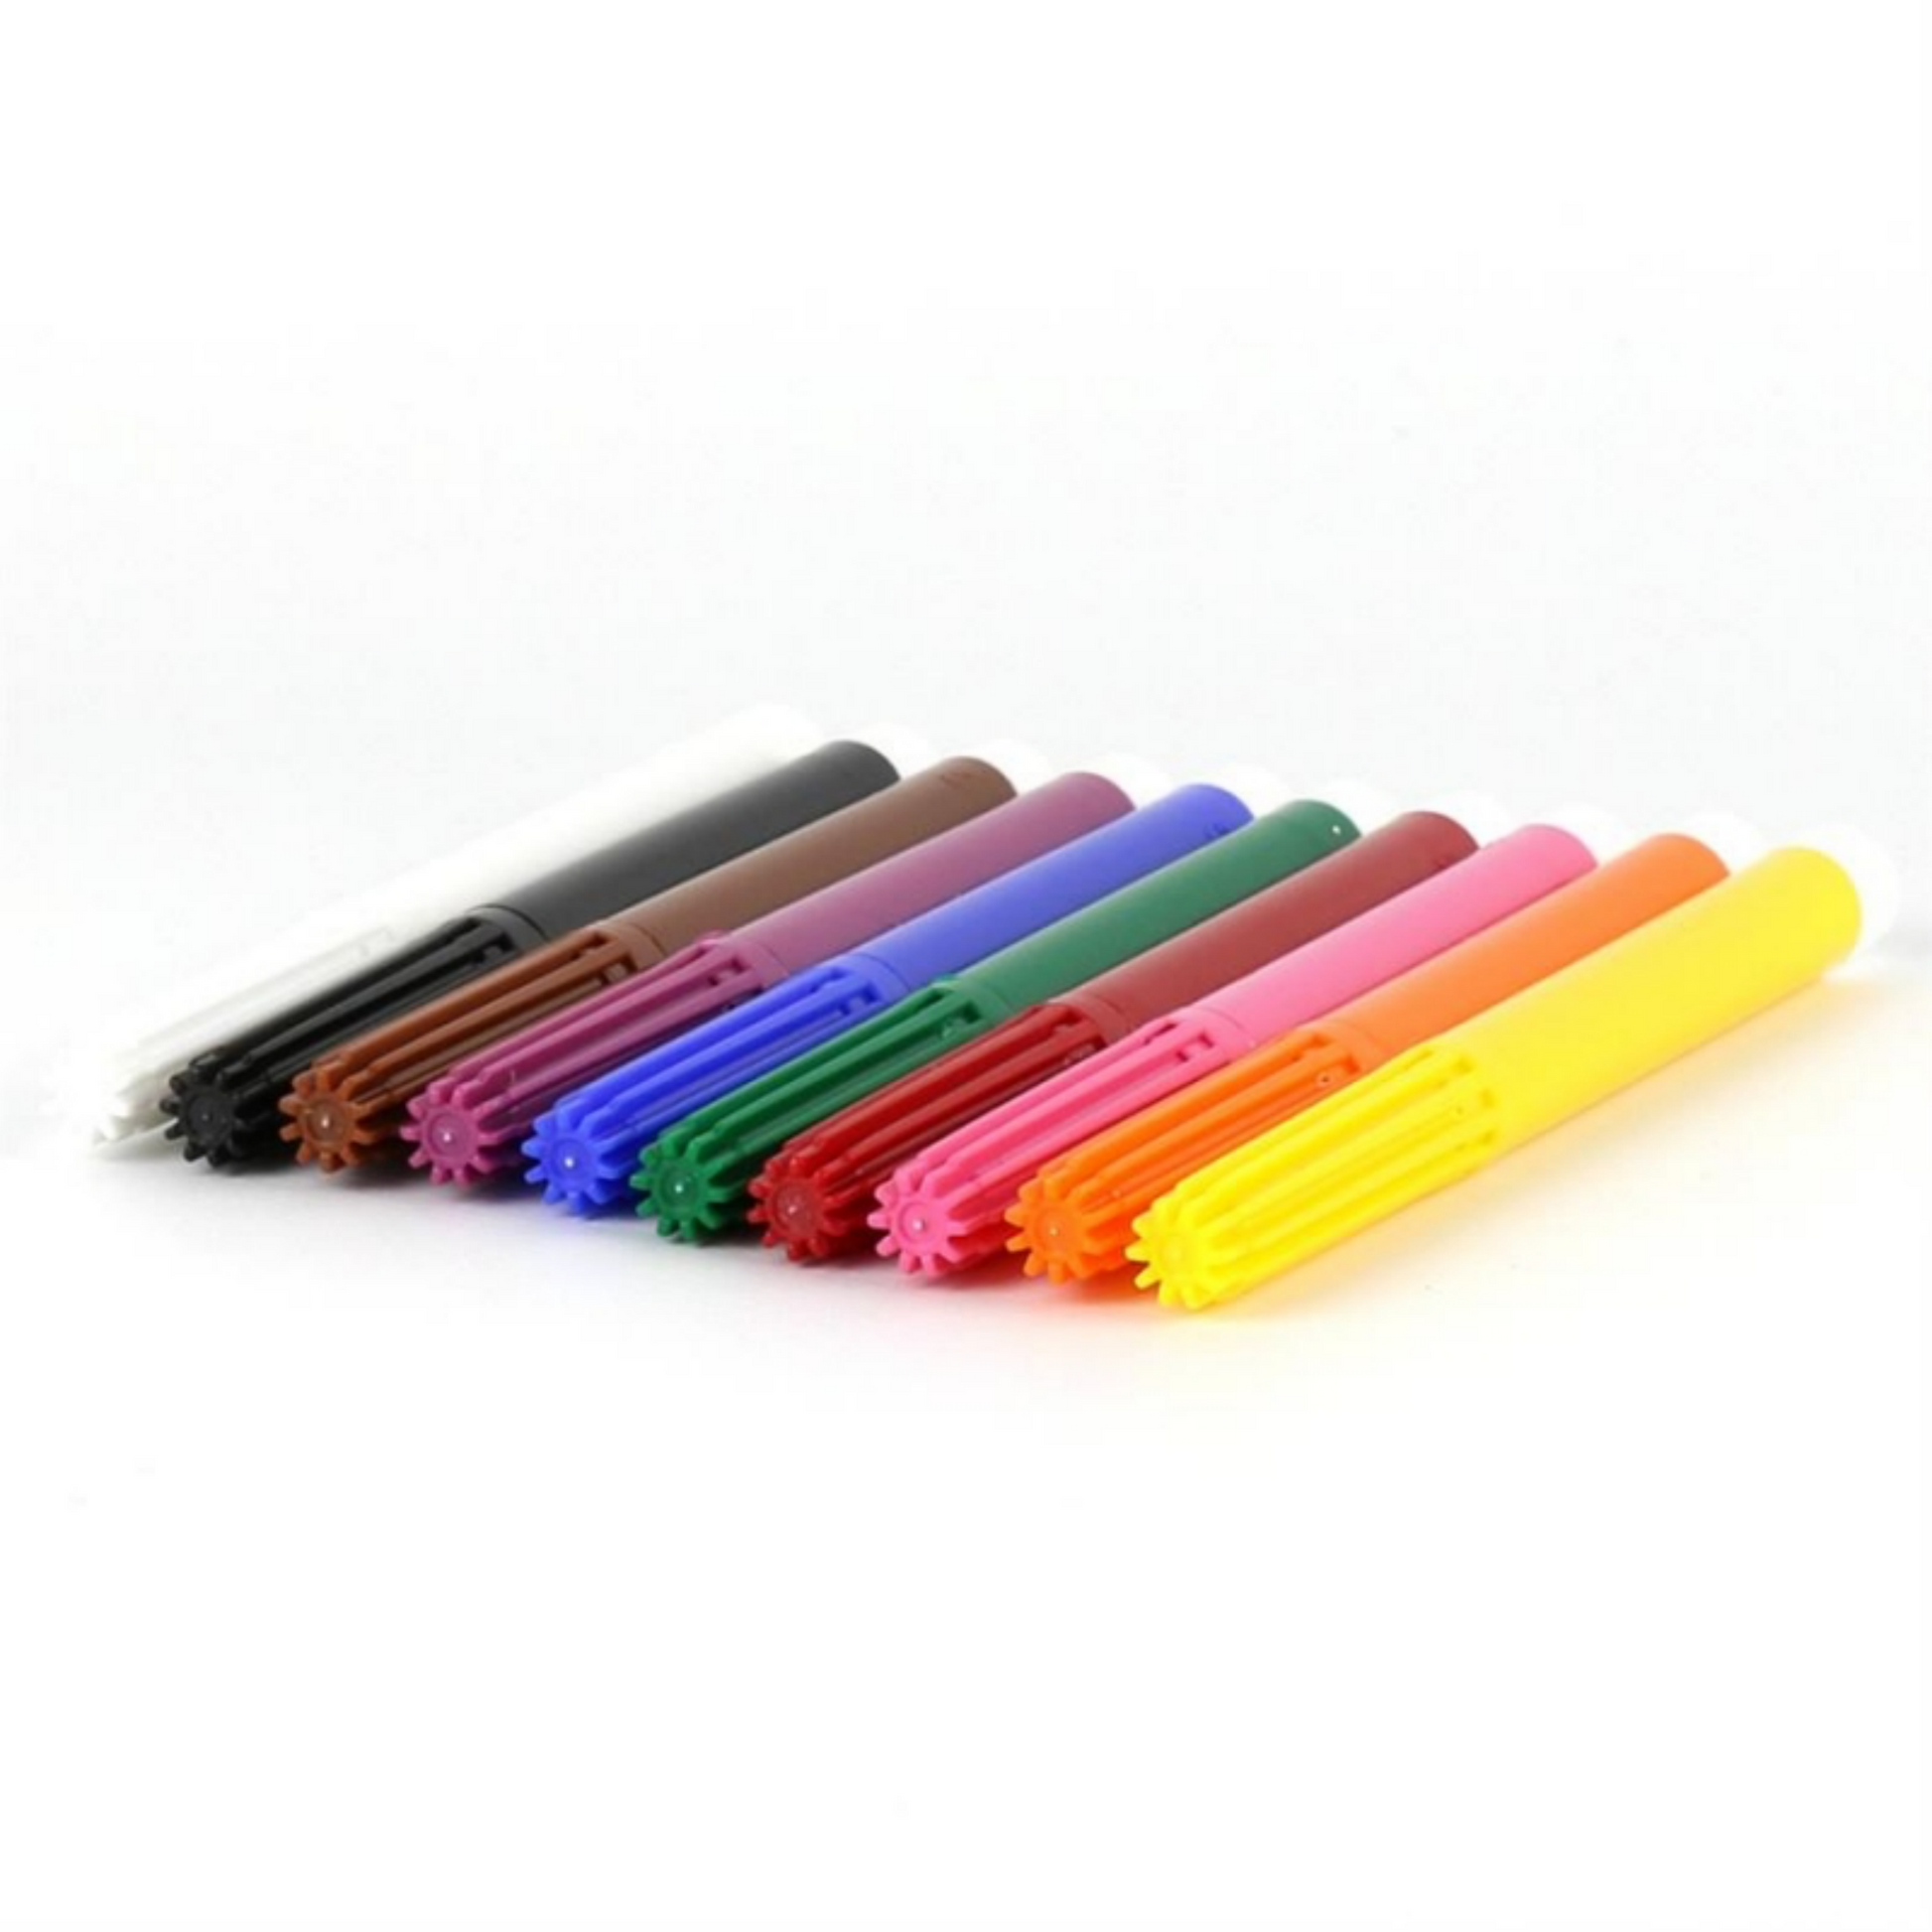 okoNORM Felt-Tip Pens with Eraser | Vegan, Water-Based Inks & Eco-Friendly | 9 Colours | Unboxed Pens | BeoVERDE.ie